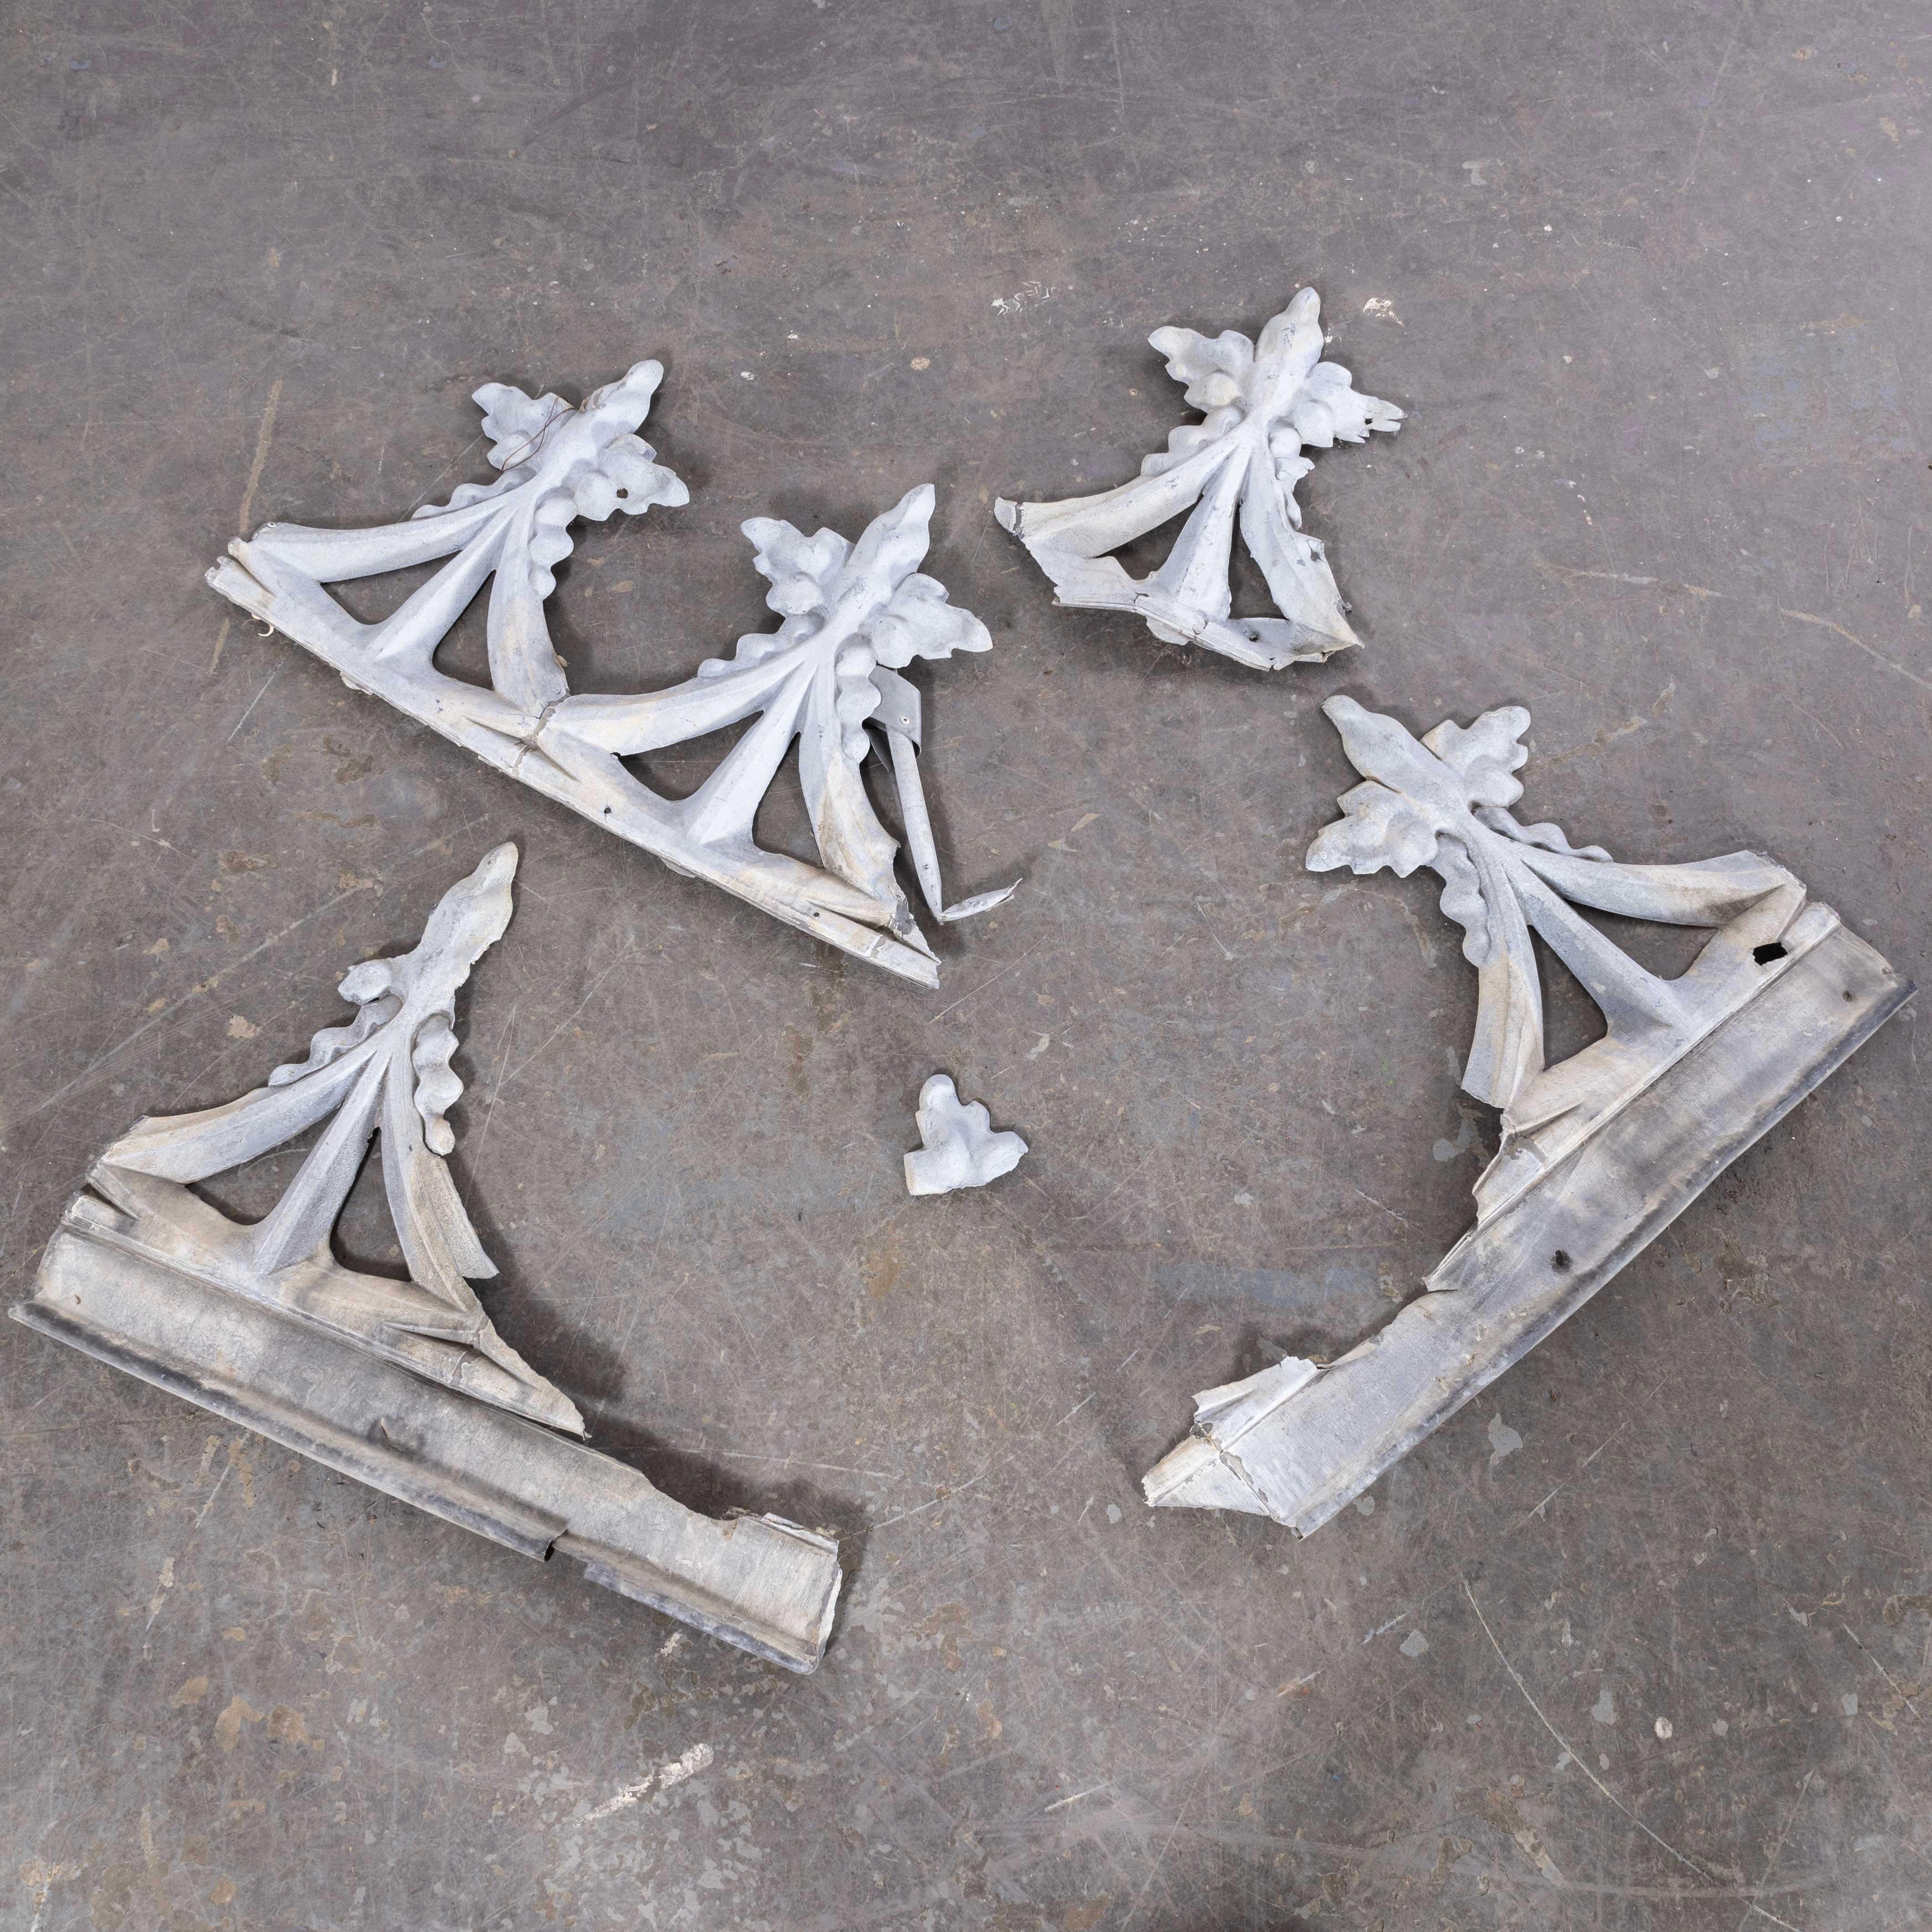 1920’s French Decorative Zinc Roof Edging Panels – Set
1920’s French Decorative Zinc Roof Edging Panels – Set. Original French early 20th century decorative roof edging. Sold as a set as seen. Sizes vary from small pieces at 10cm x 10cm through to